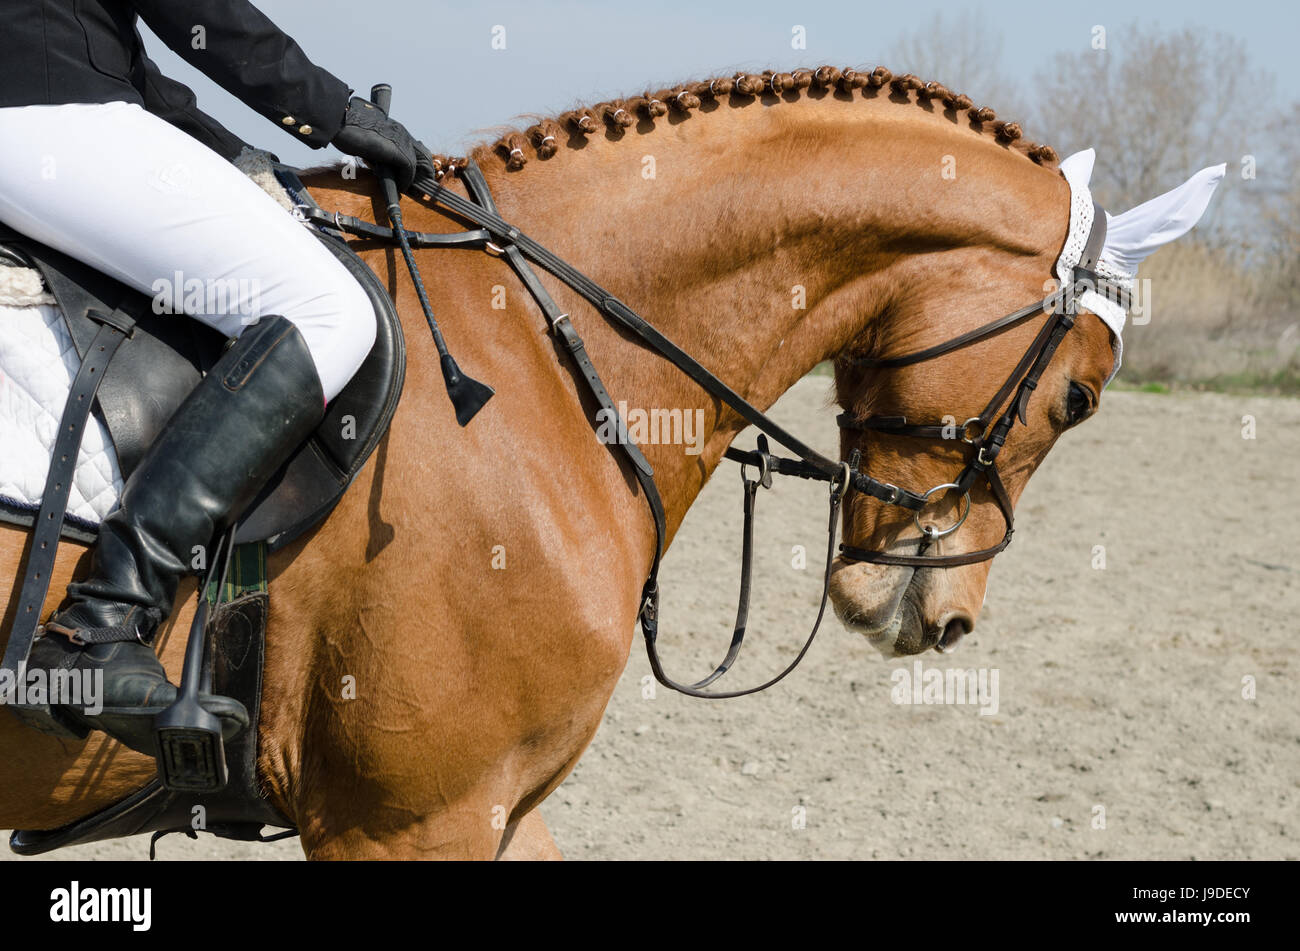 Head-shot of a show jumper horse during training with unidentified rider Stock Photo